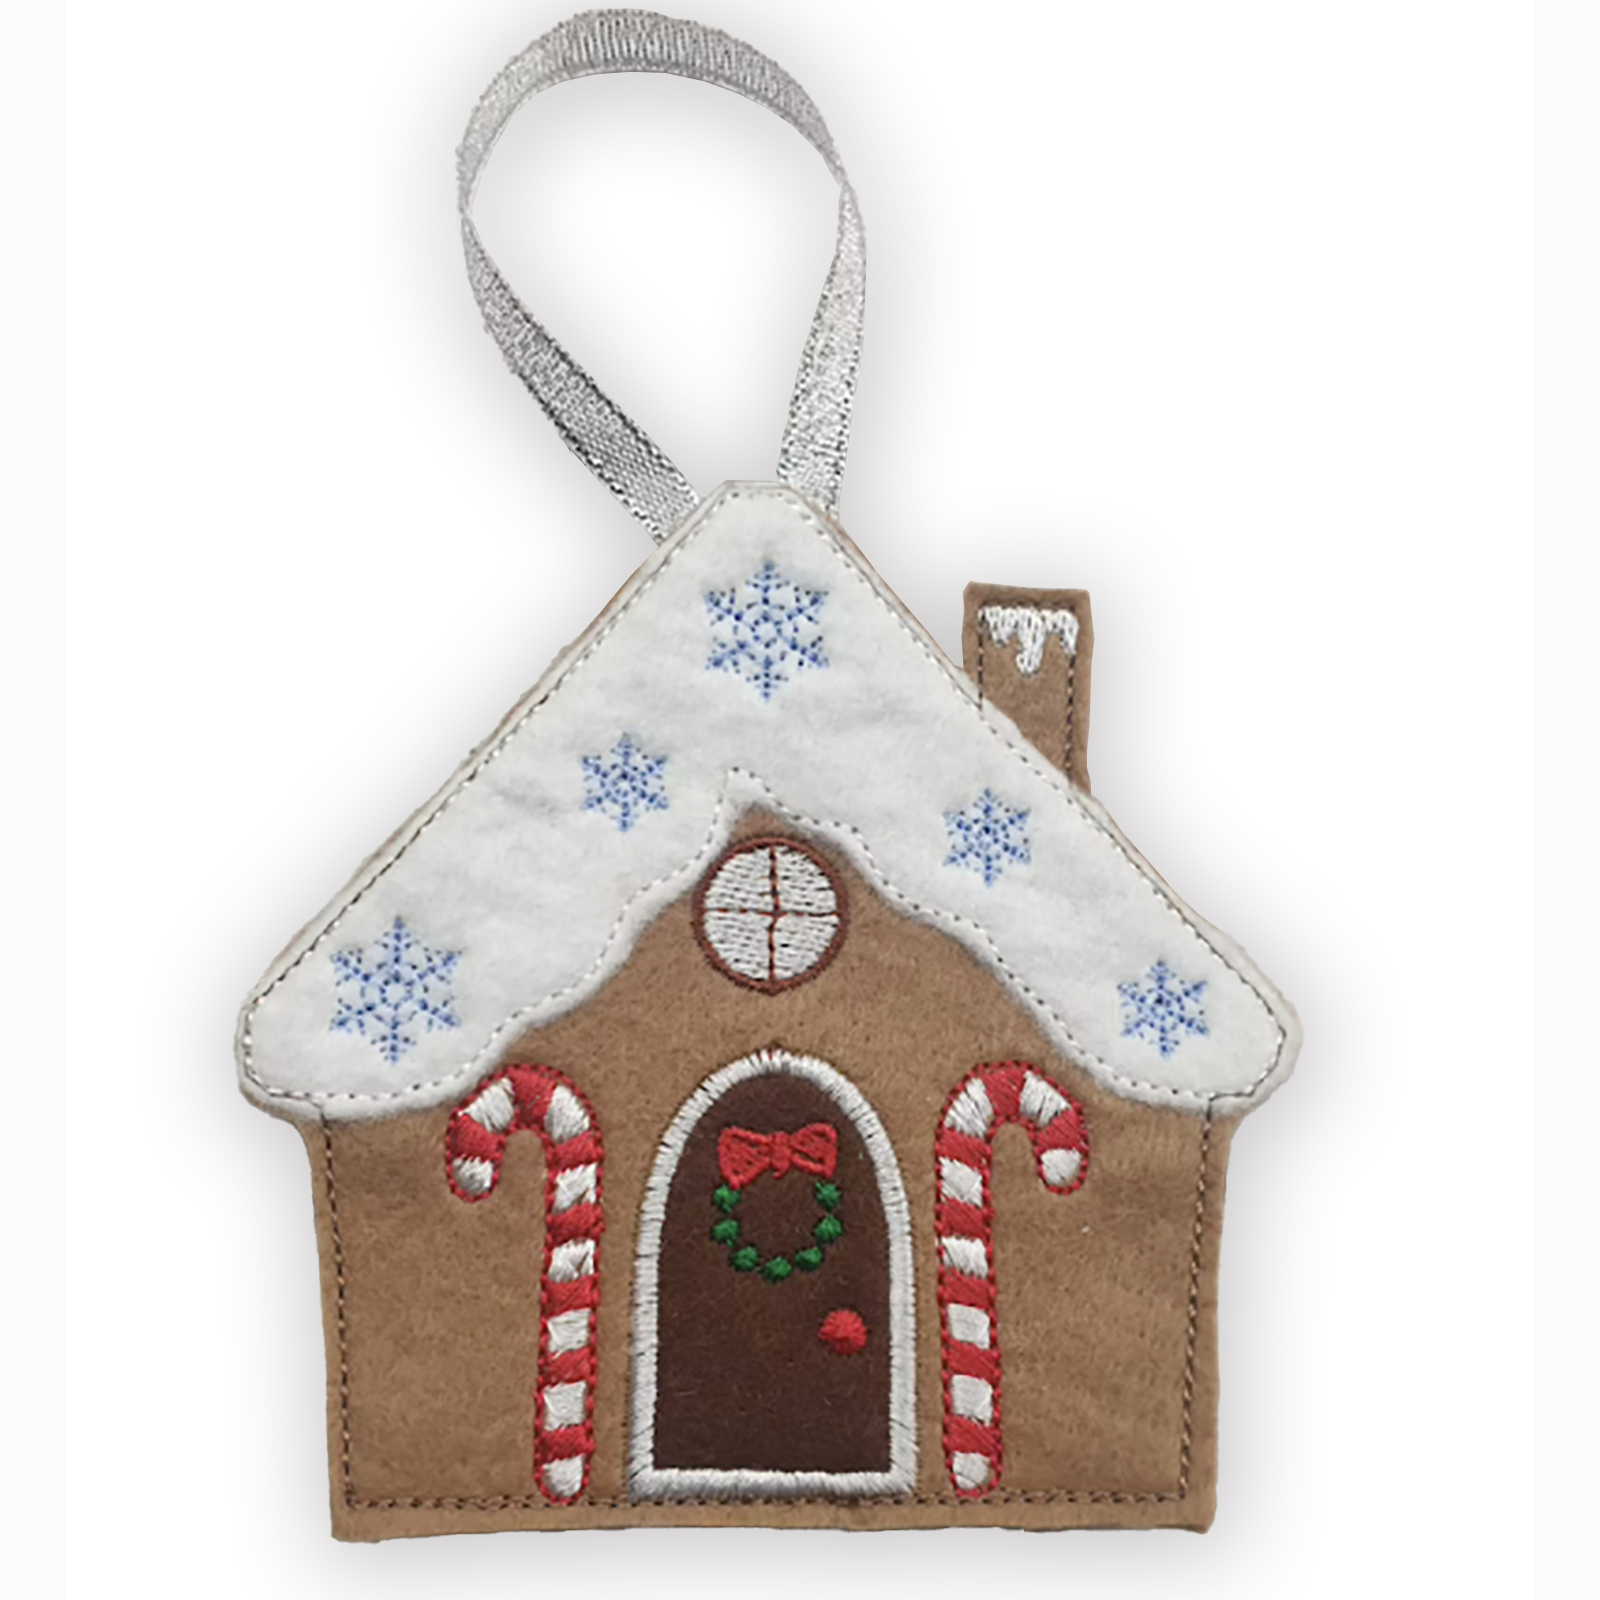 Felt Gingerbread House Christmas Tree Decoration with Candy Canes